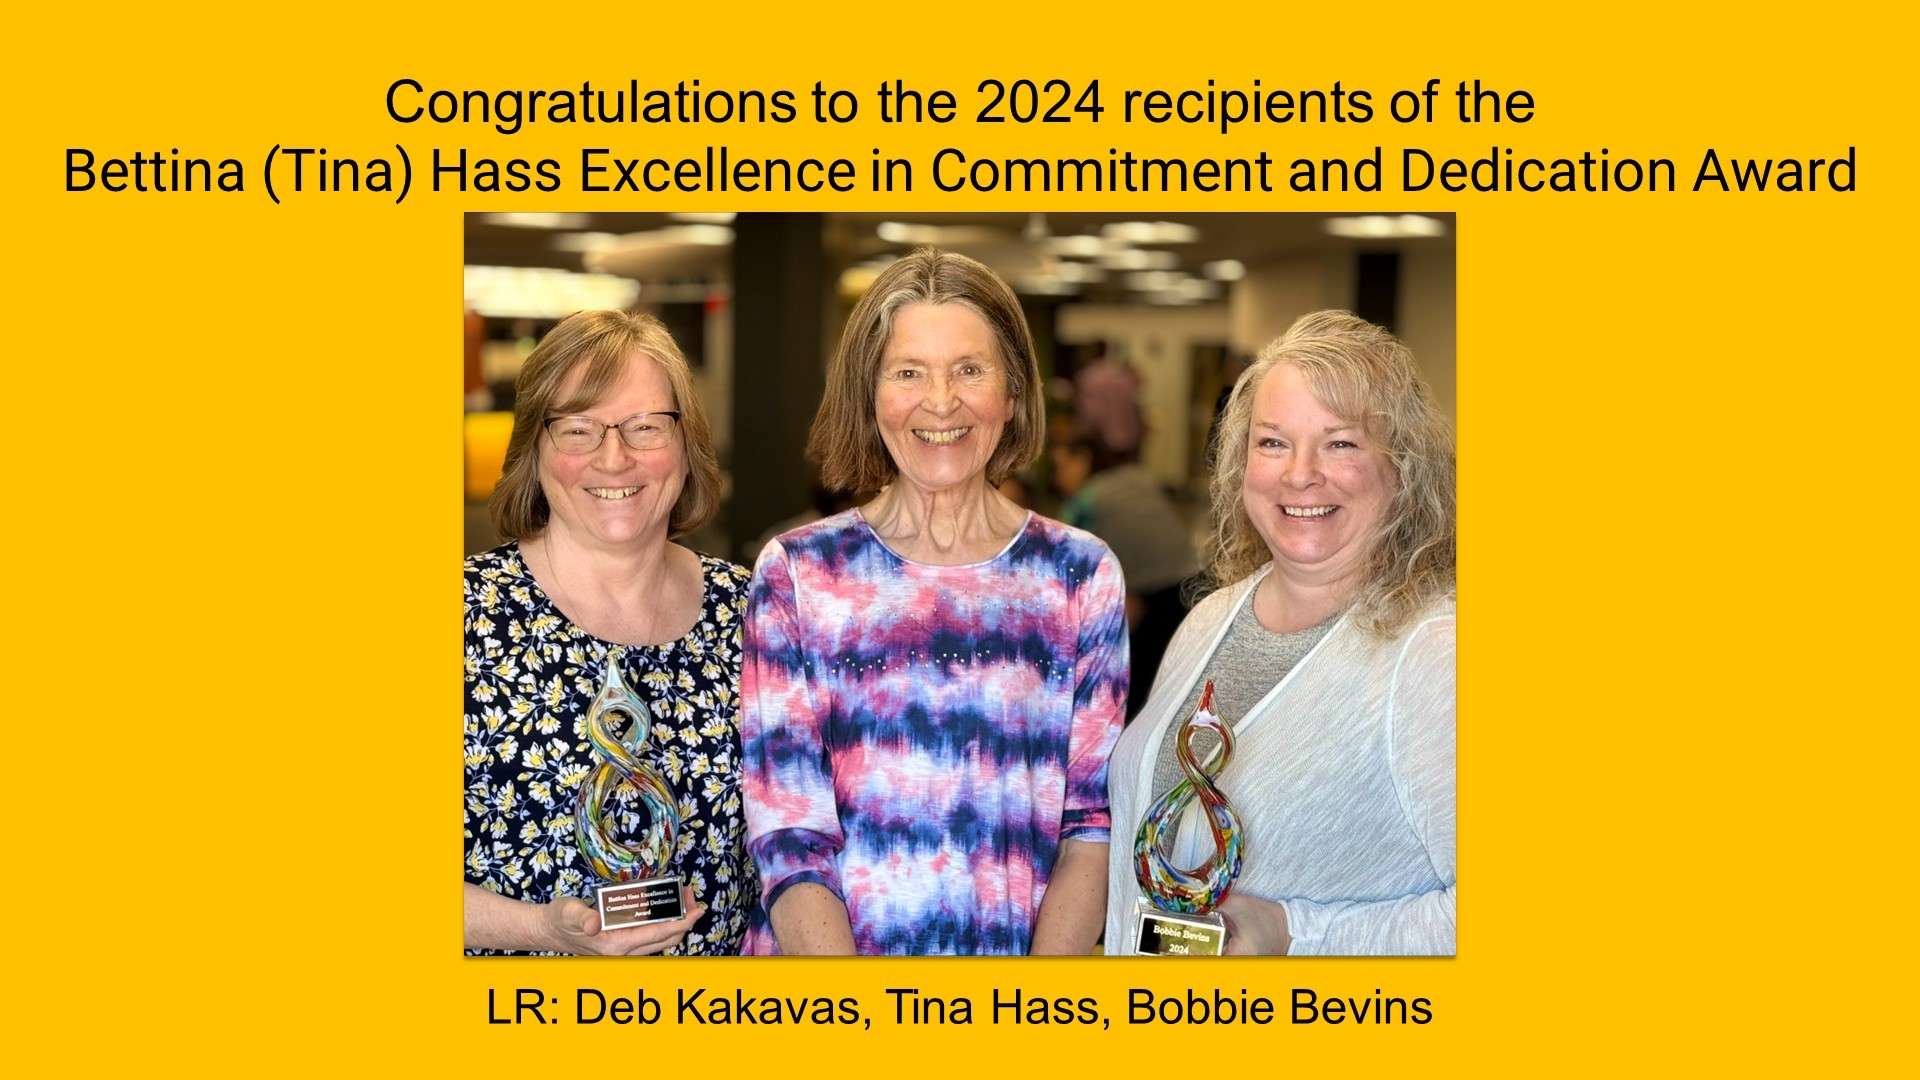 Congratulations to the 2024 recipients of the Bettina (Tina) Hass Excellence in Commitment and Dedication Award - Deb Kakabas and Bobbie Bevins